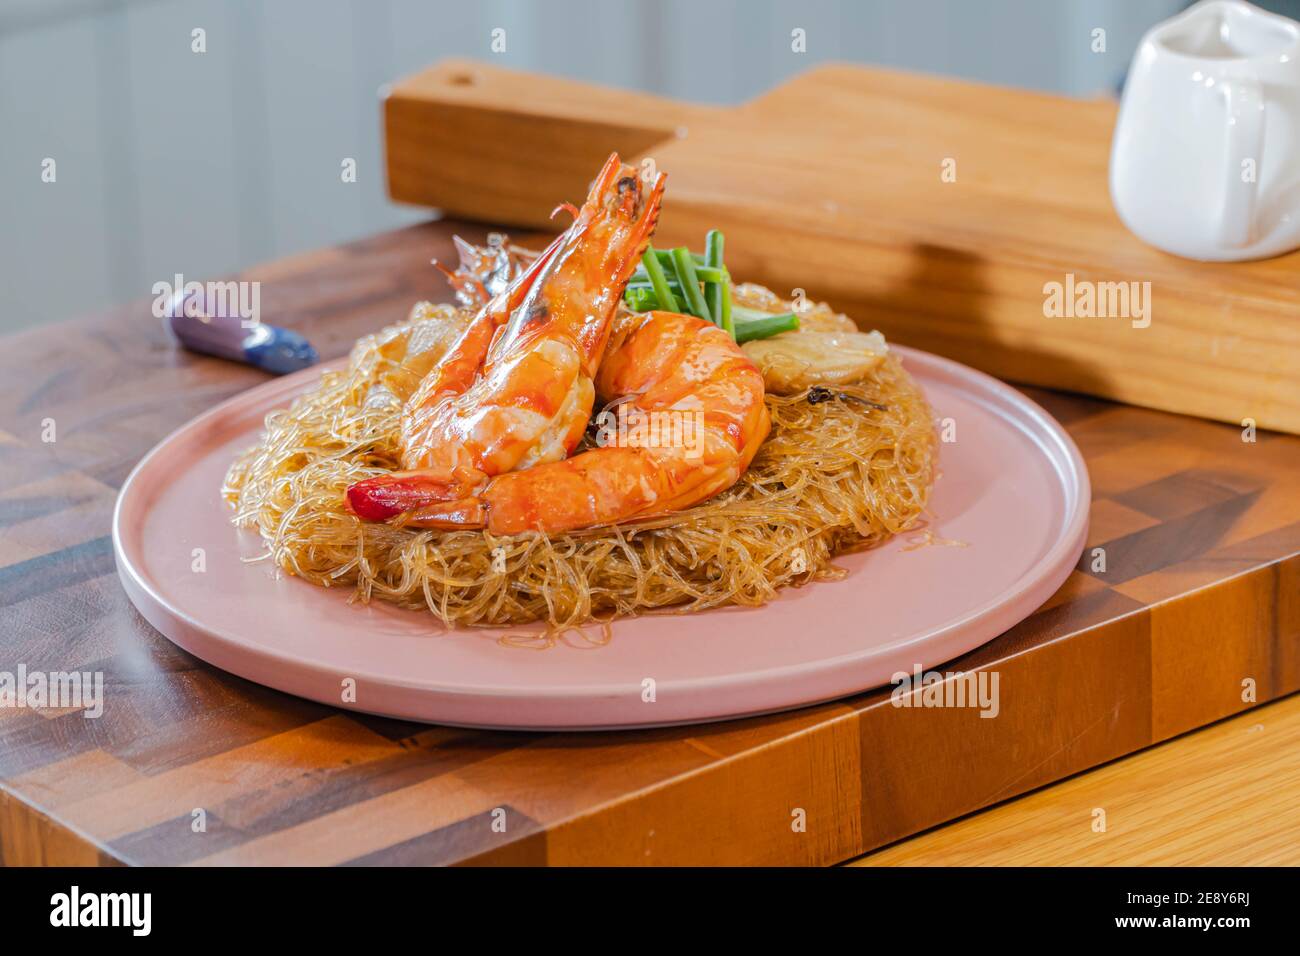 Baked Shrimp with Glass Noodles, a traditional Thai food wrapped in heat-treated freud paper and chopsticks, ready to serve-eat Stock Photo